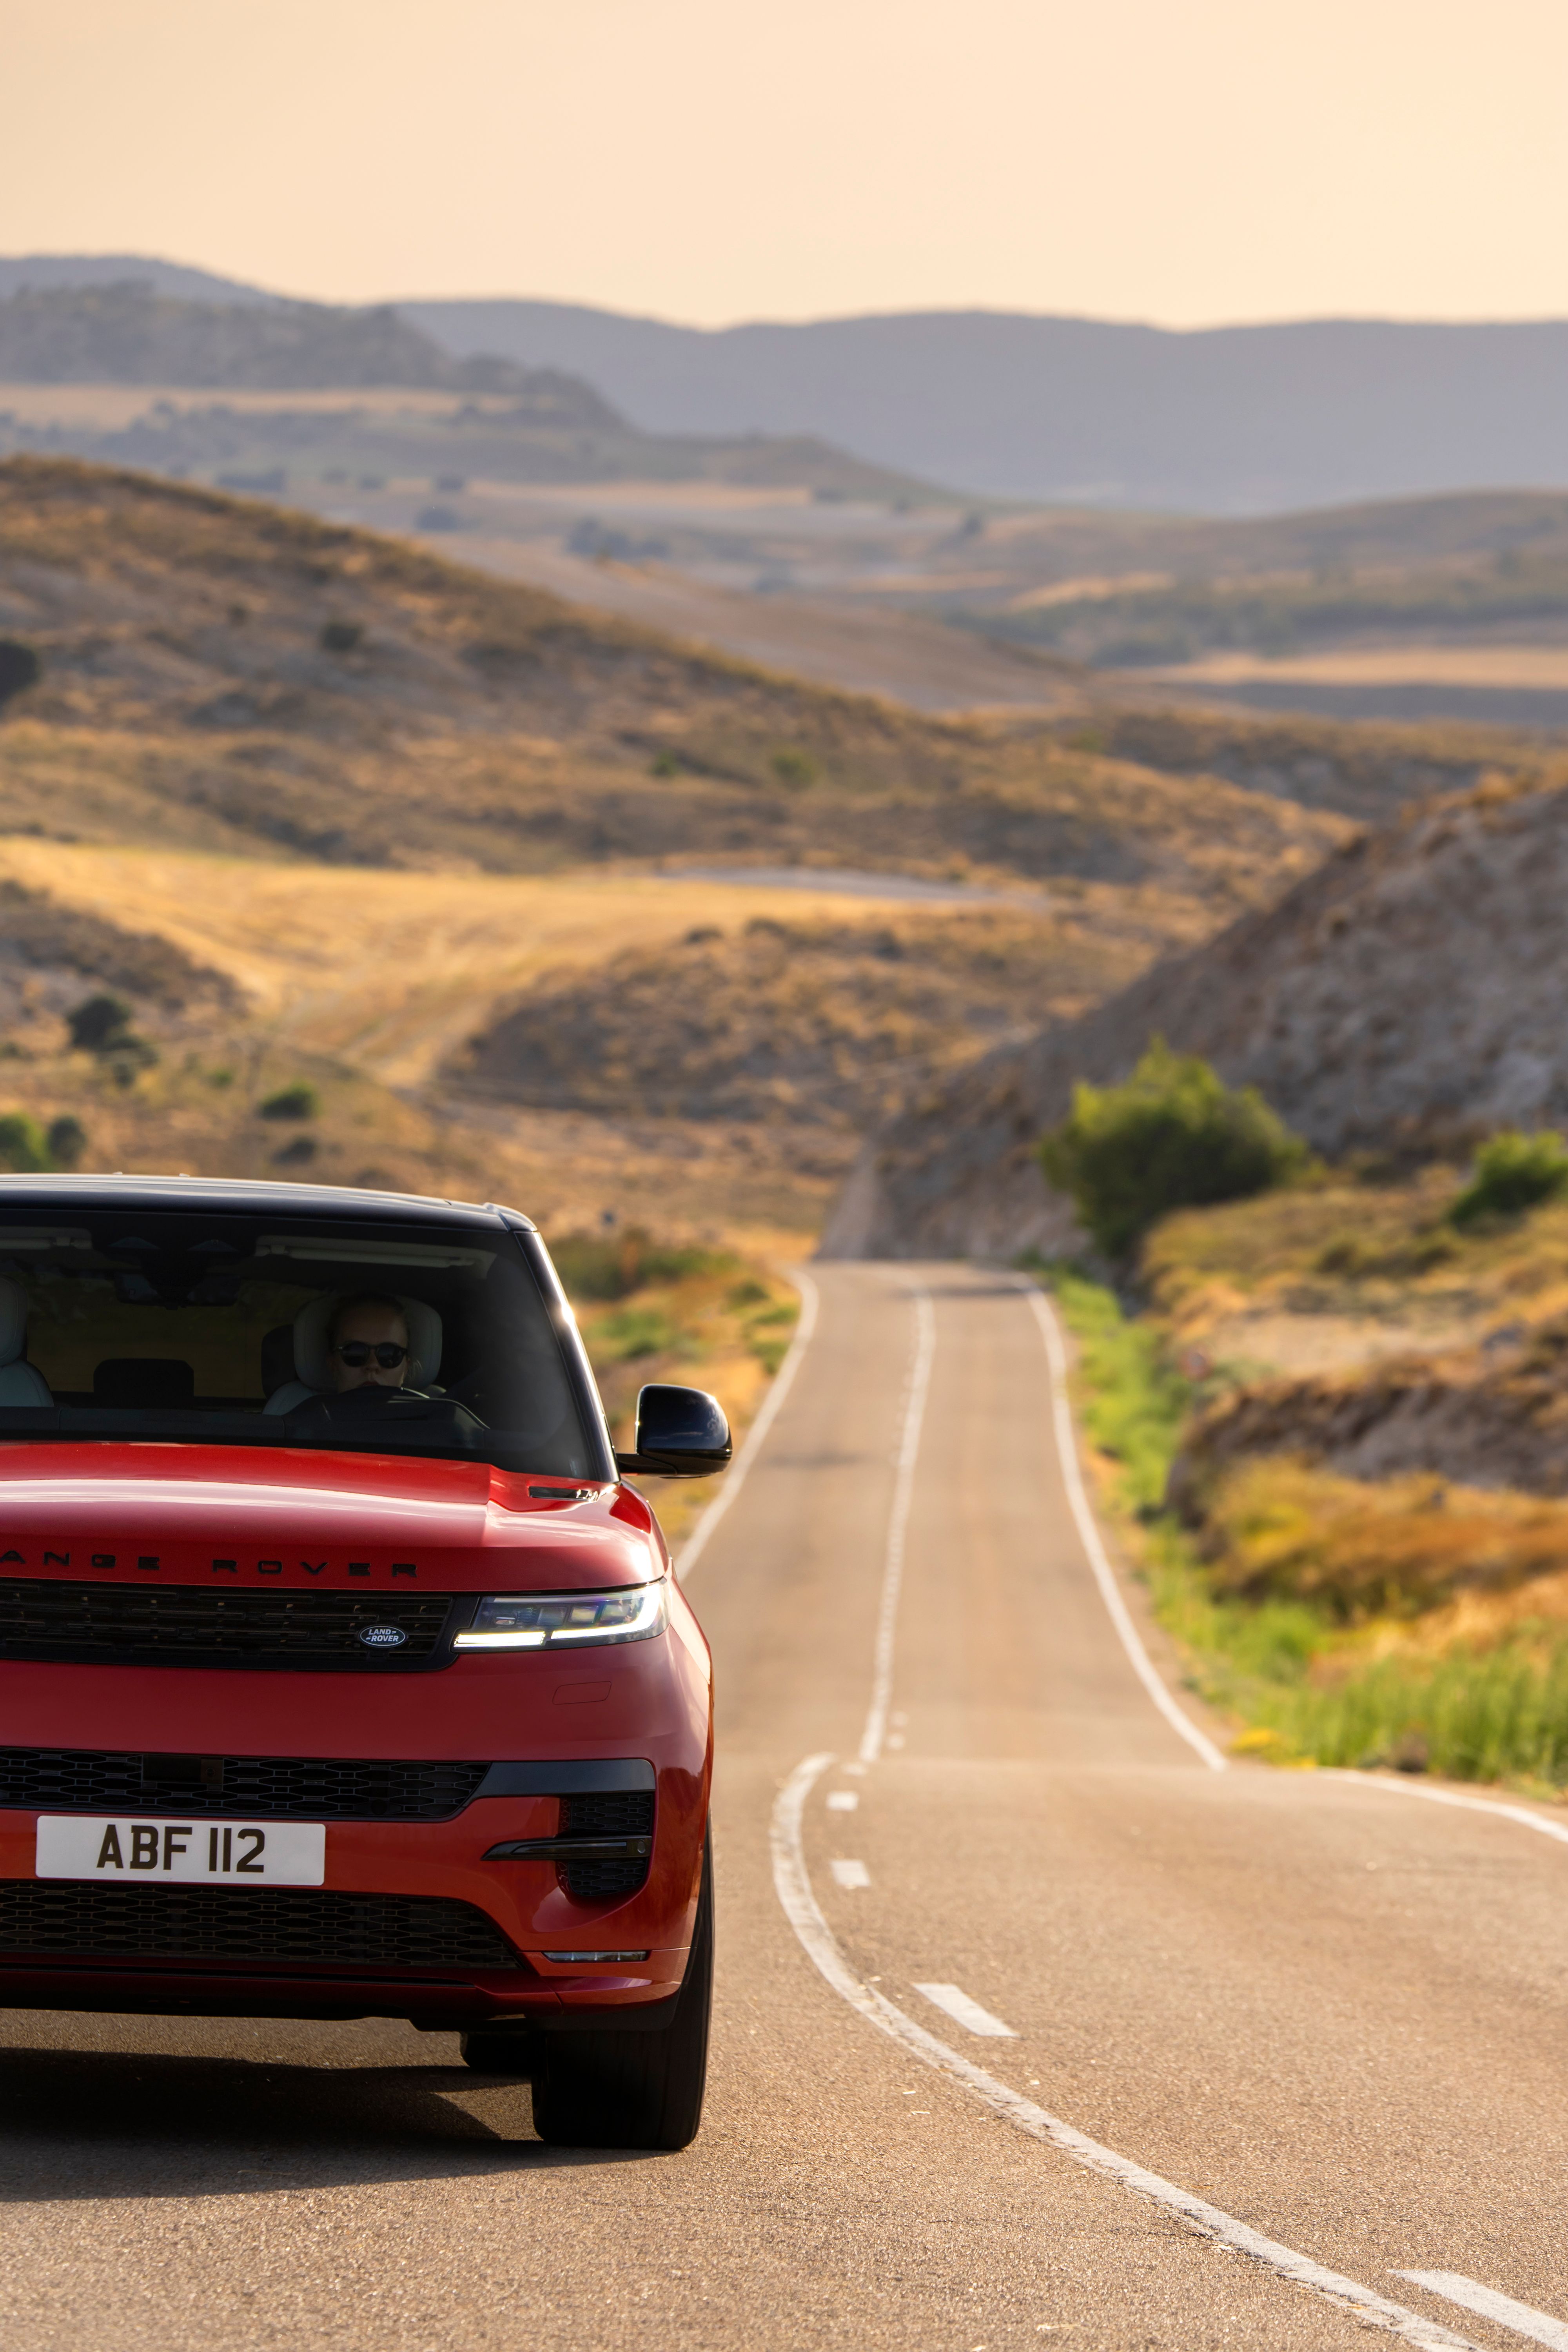 We drive the new Range Rover Sport V8 First Edition and First Edition Add-on